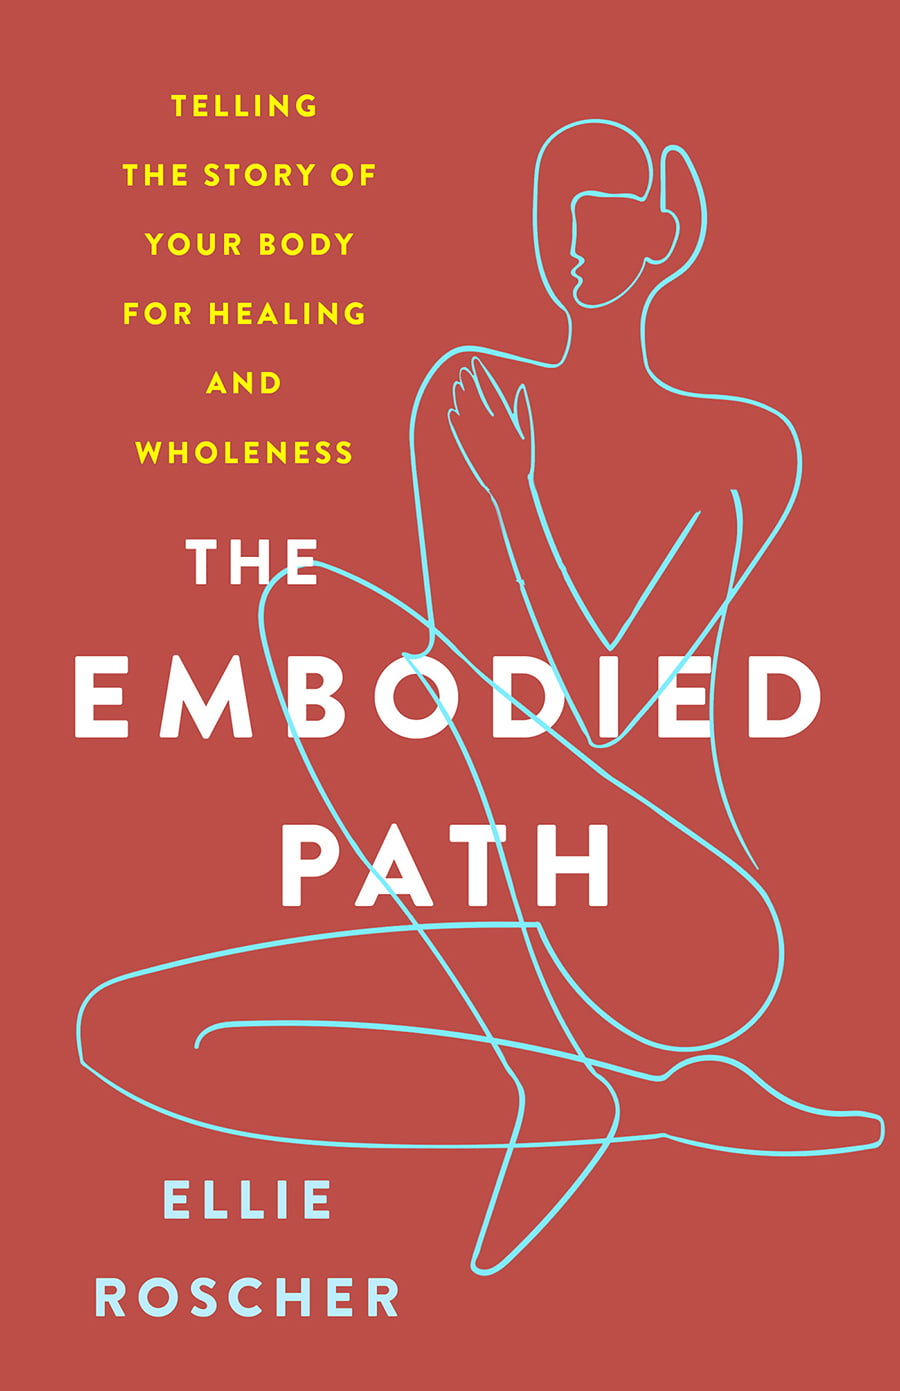 The Embodied Path book cover